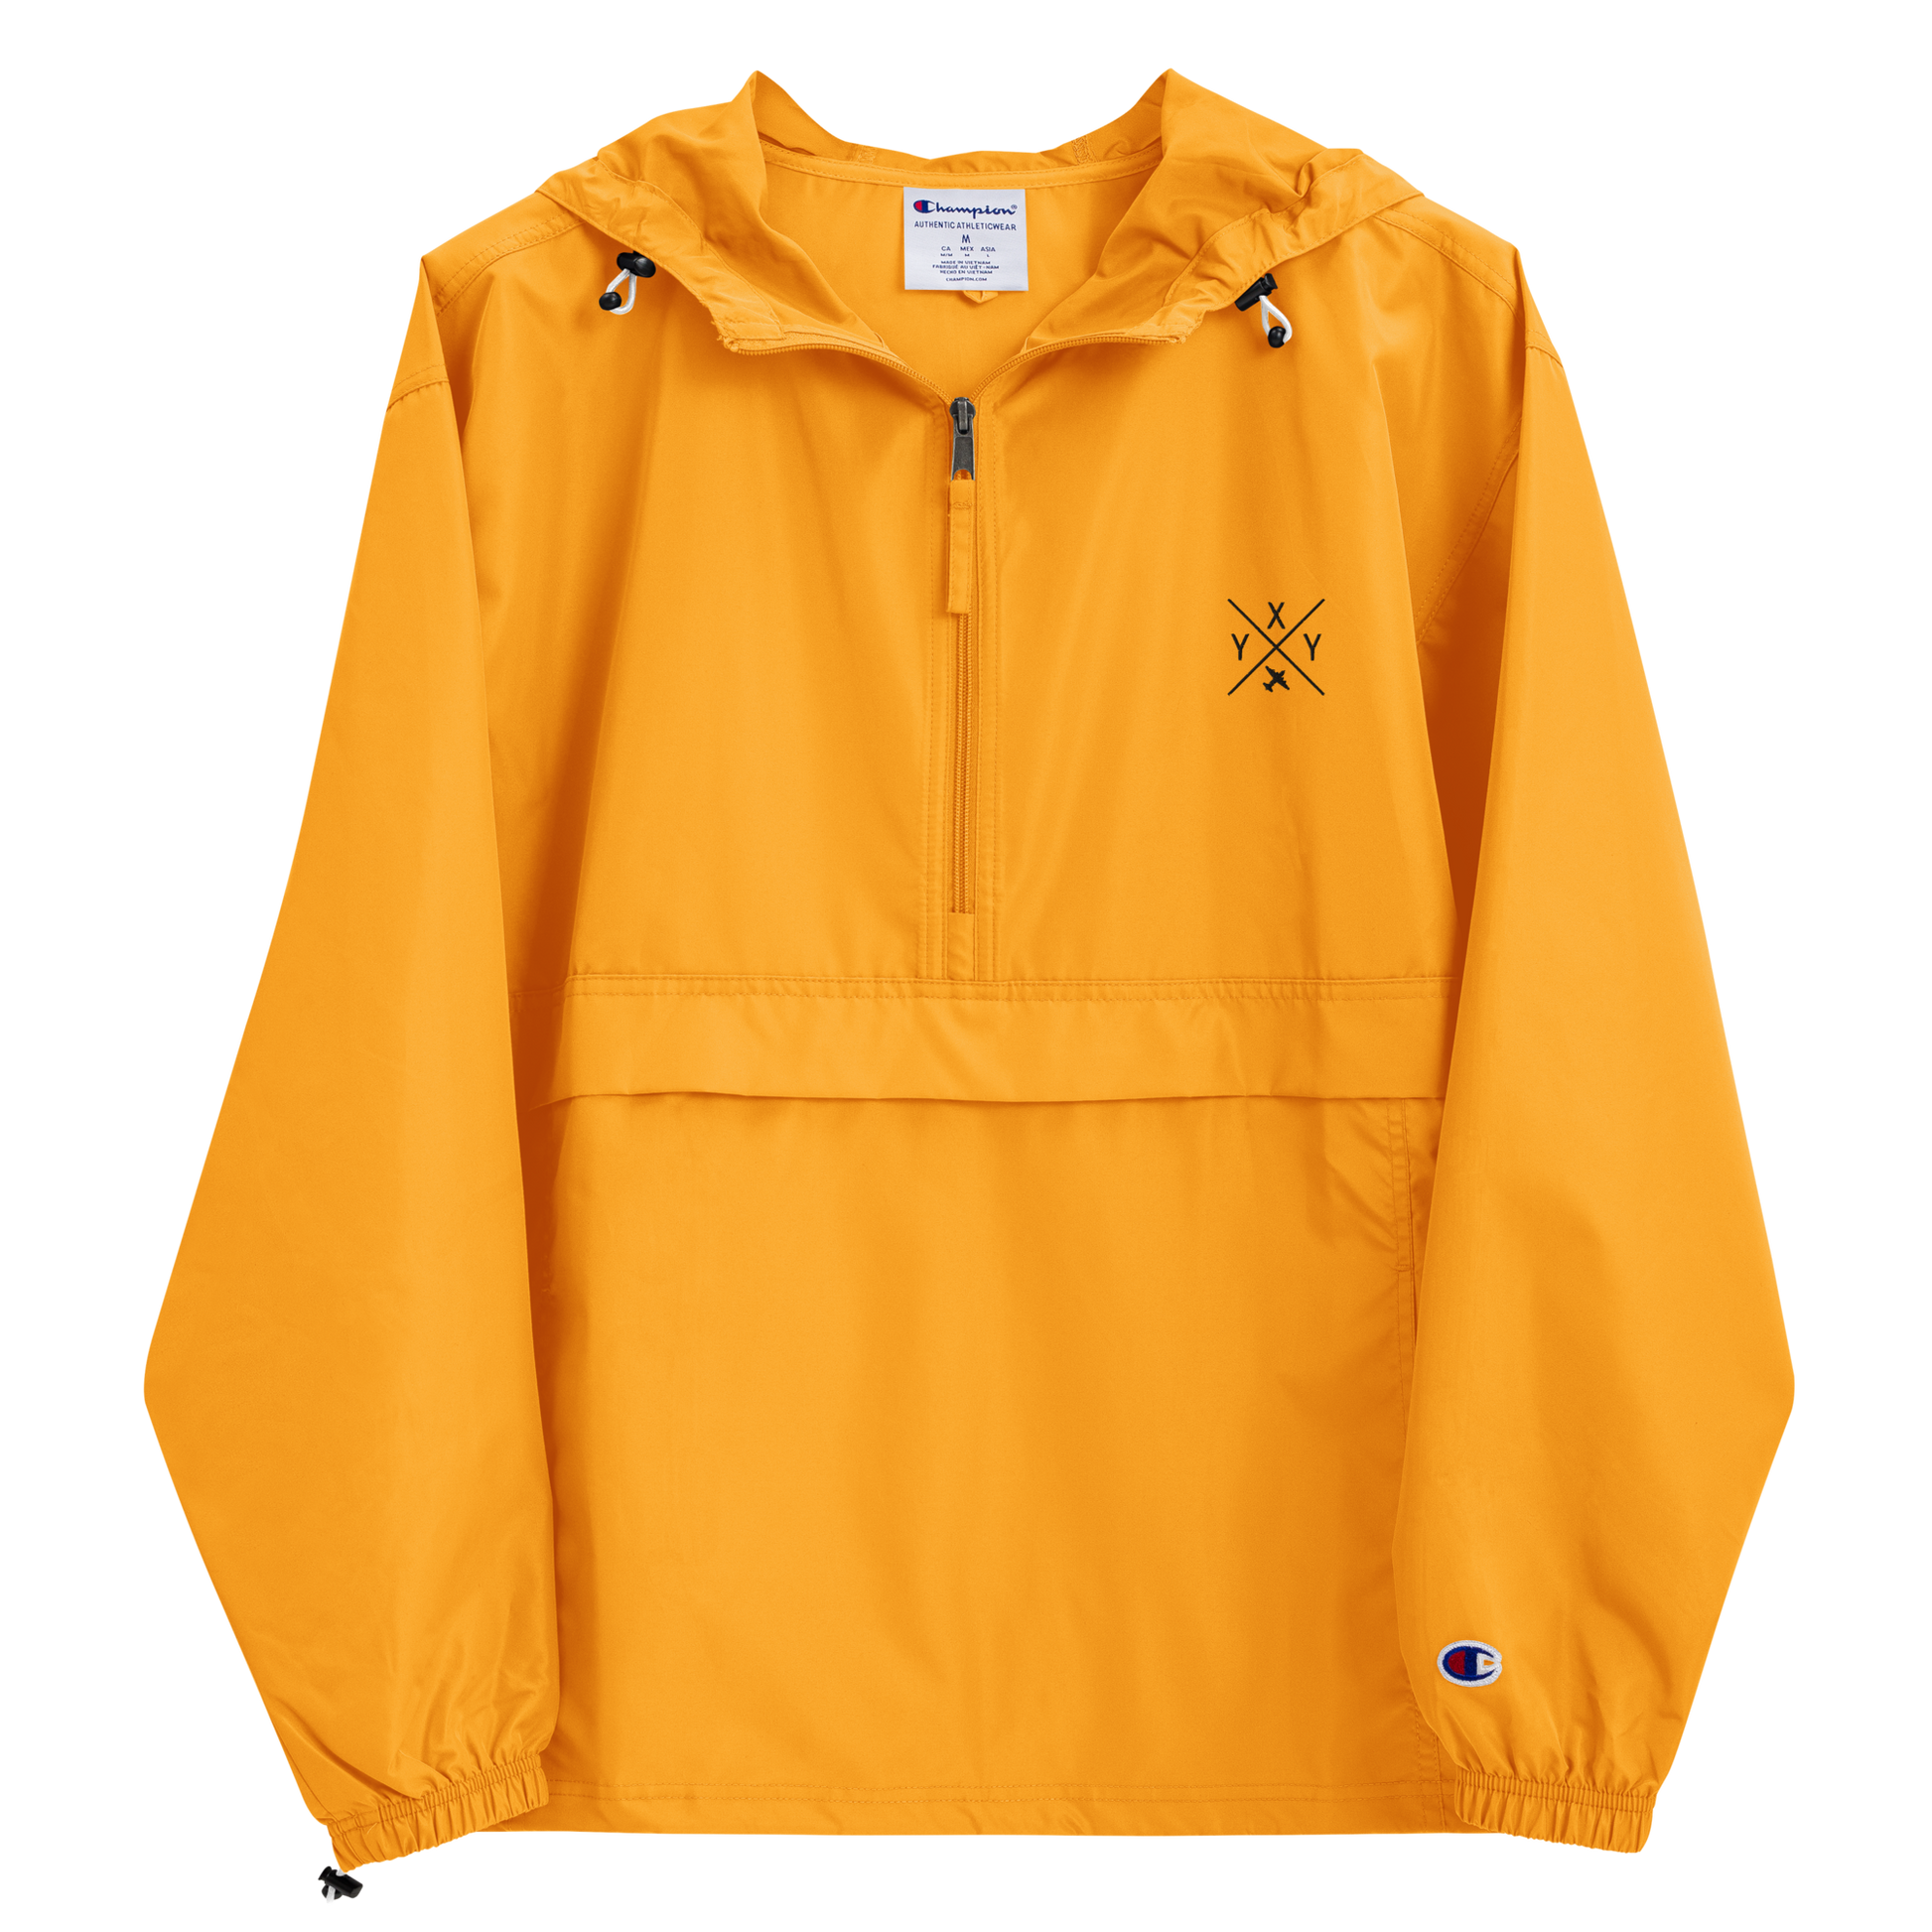 Crossed-X Packable Jacket • YXY Whitehorse • YHM Designs - Image 07